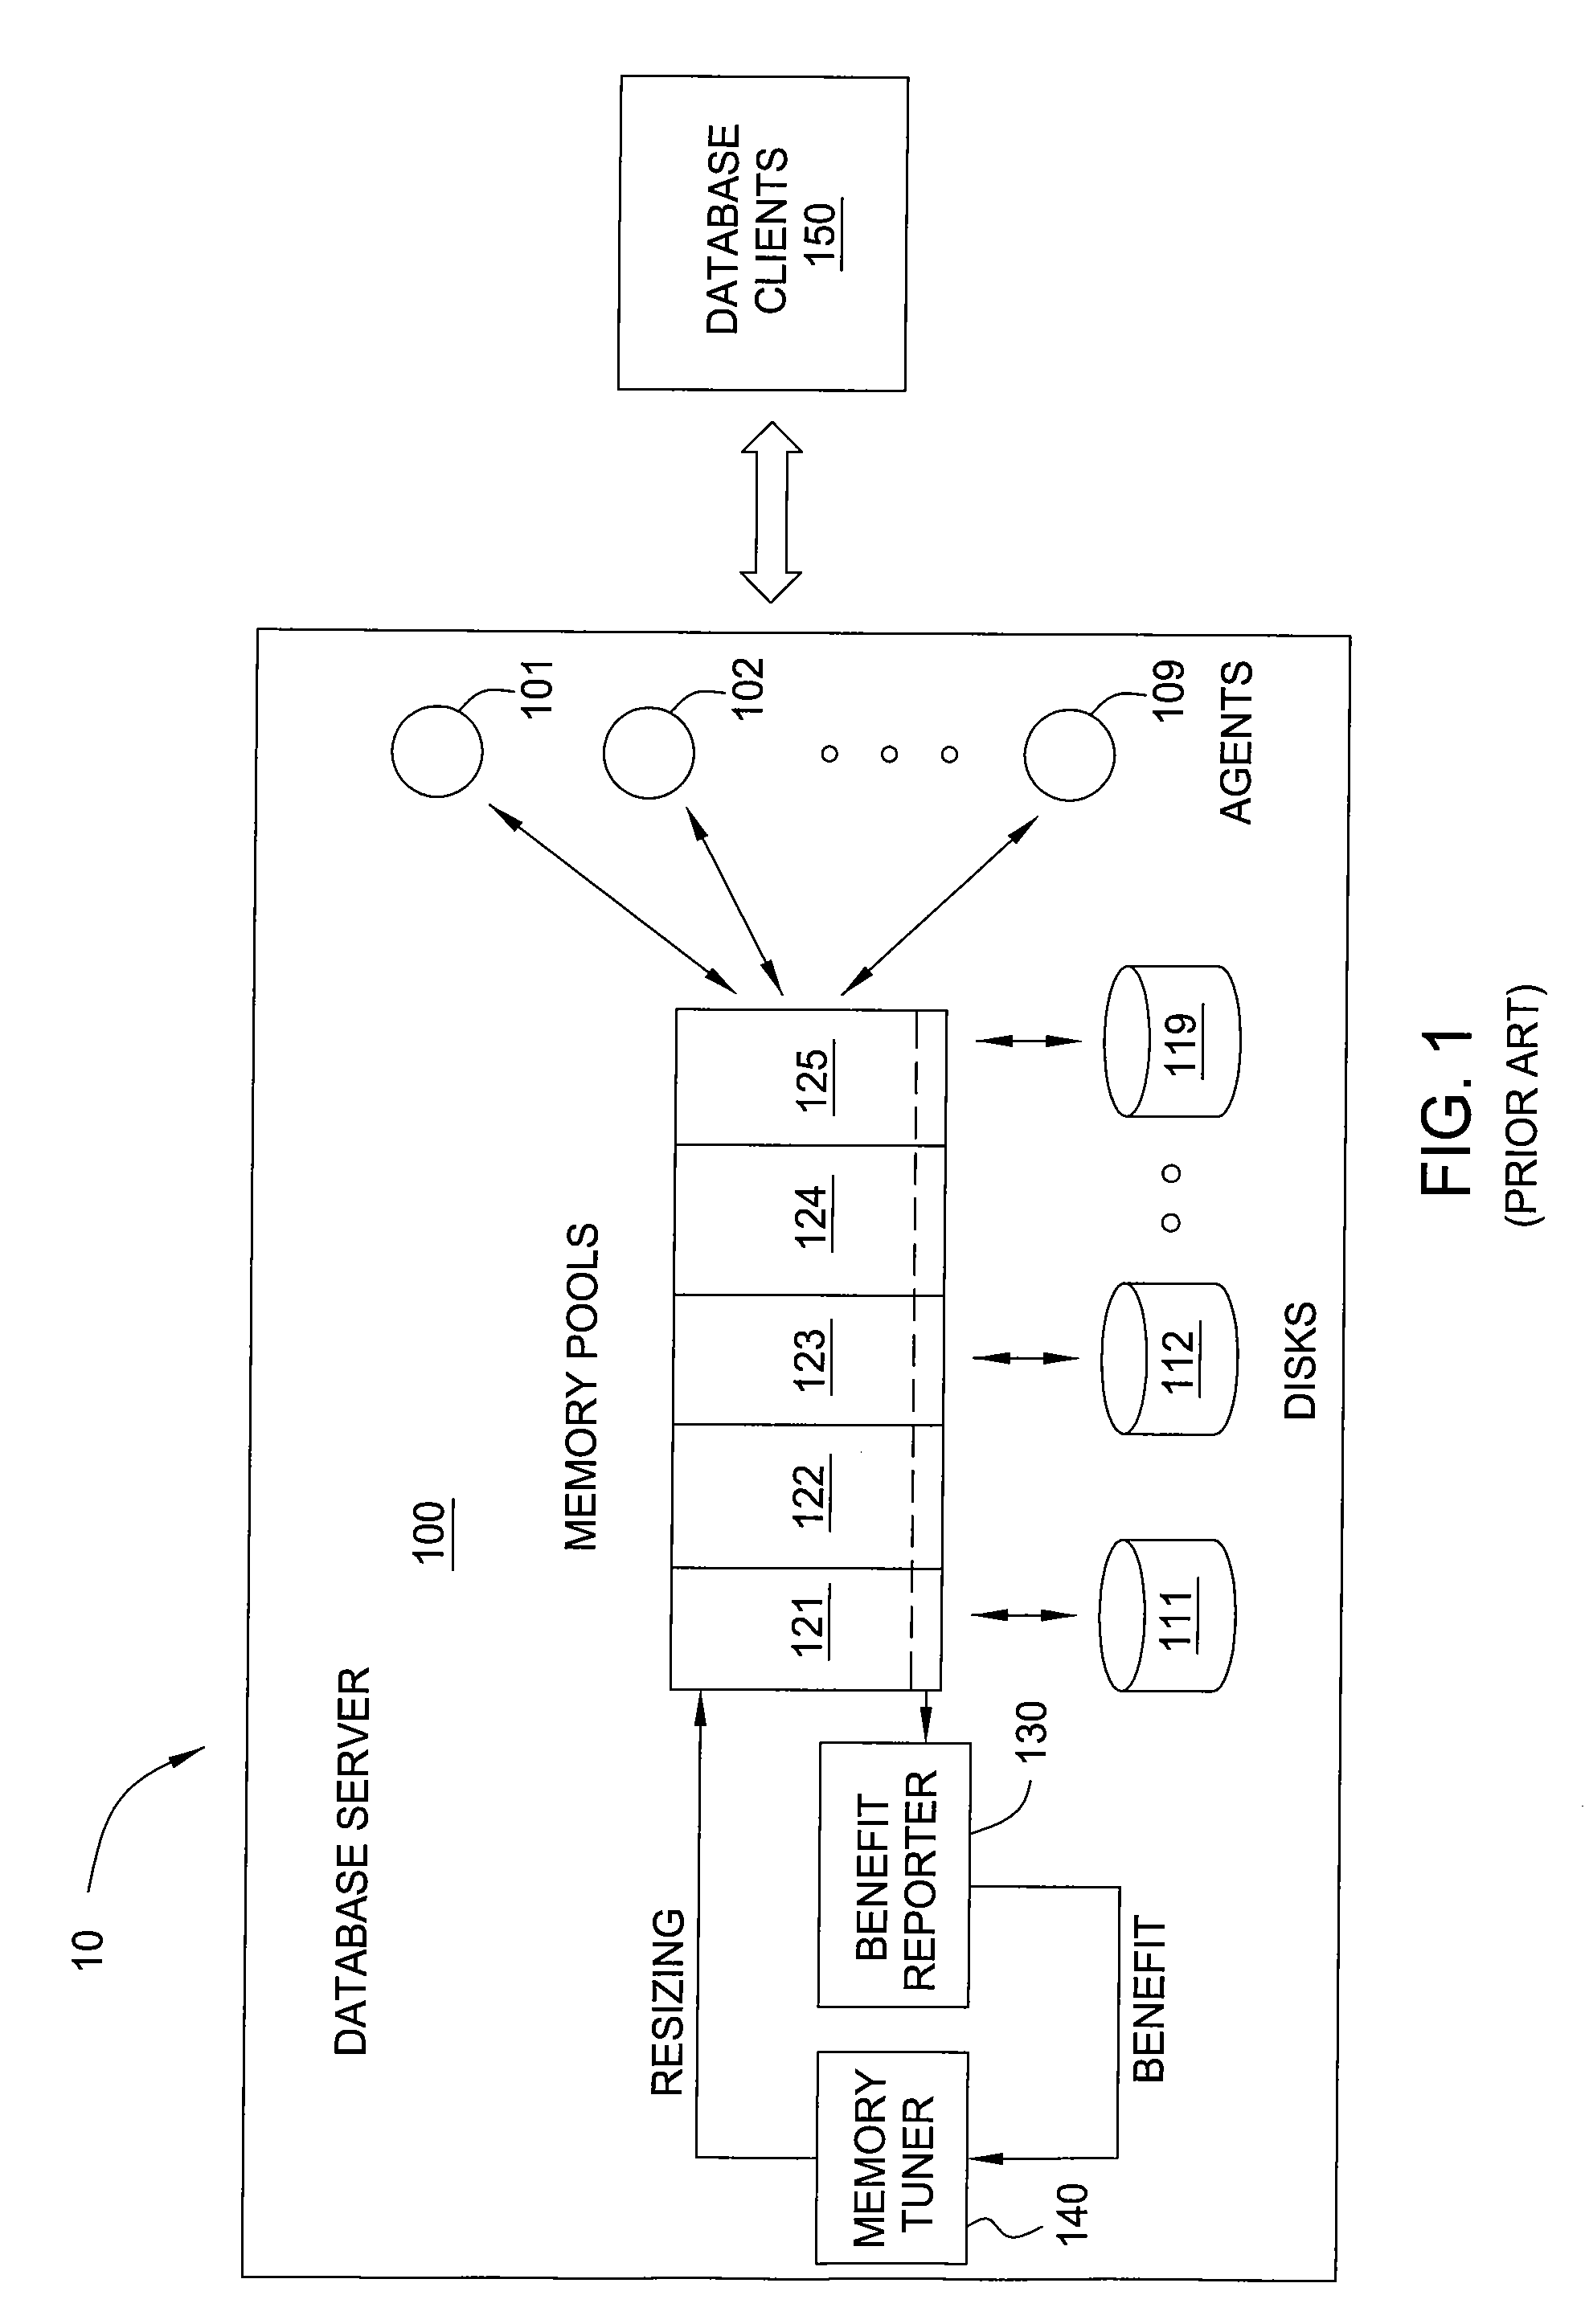 Method and apparatus for online sample interval determination